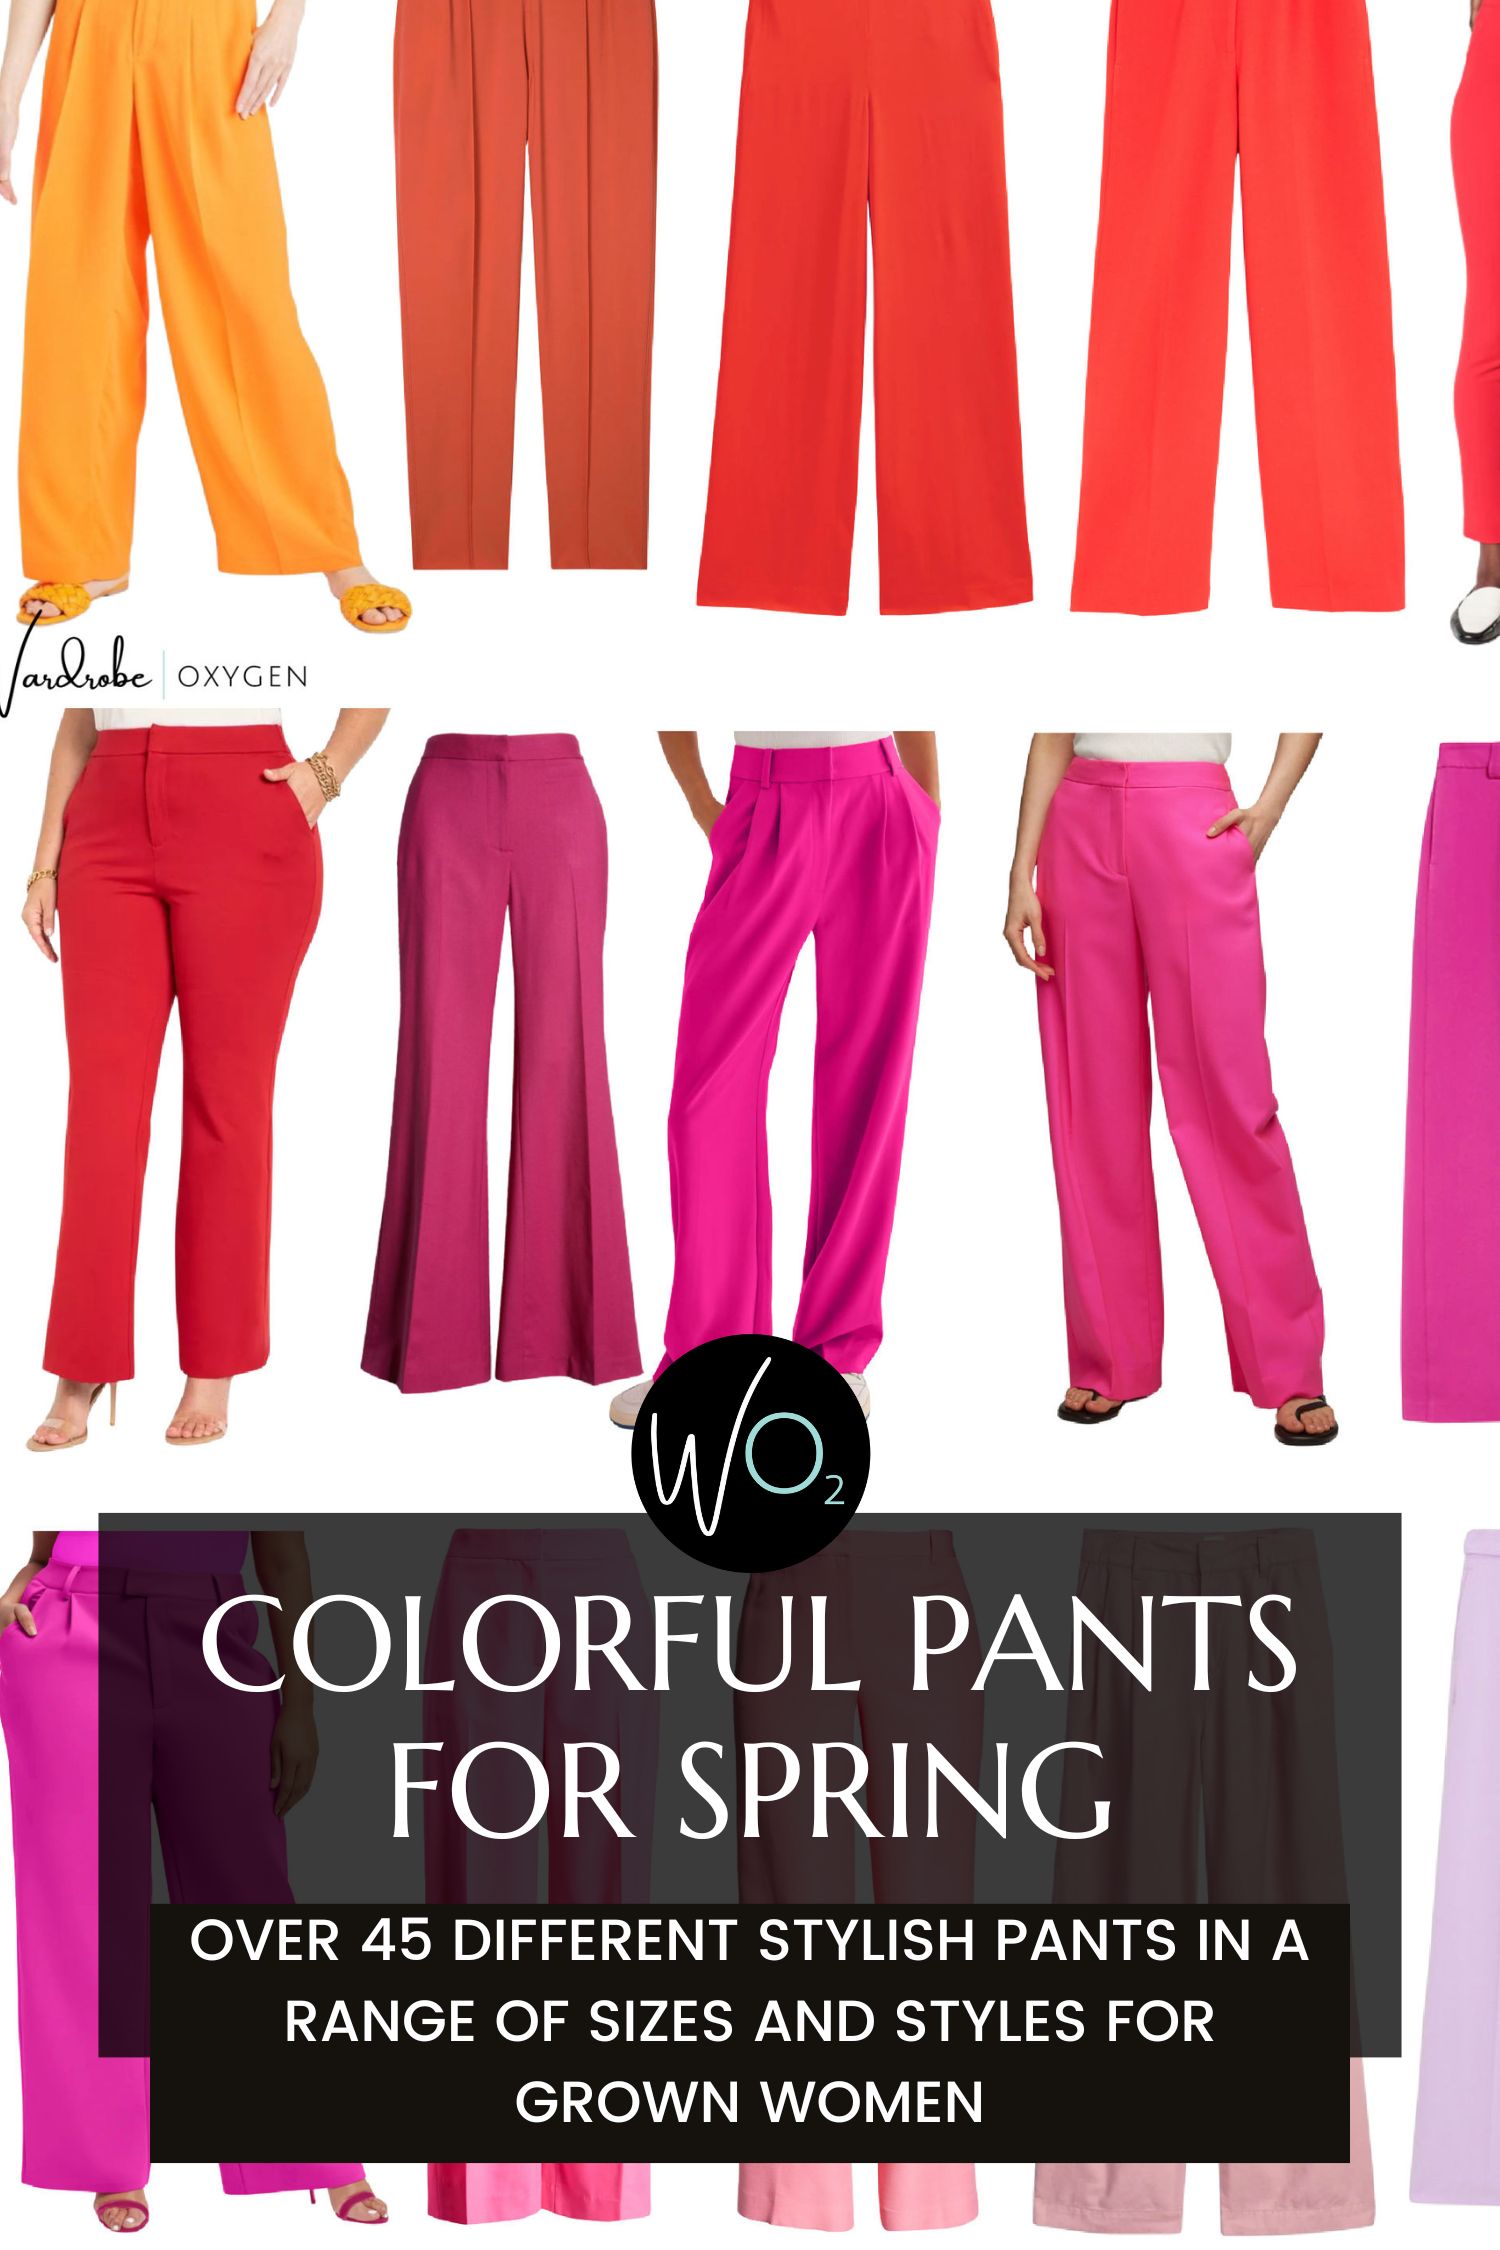 Colorful Pants for Spring for Grown Women: 45+ Options